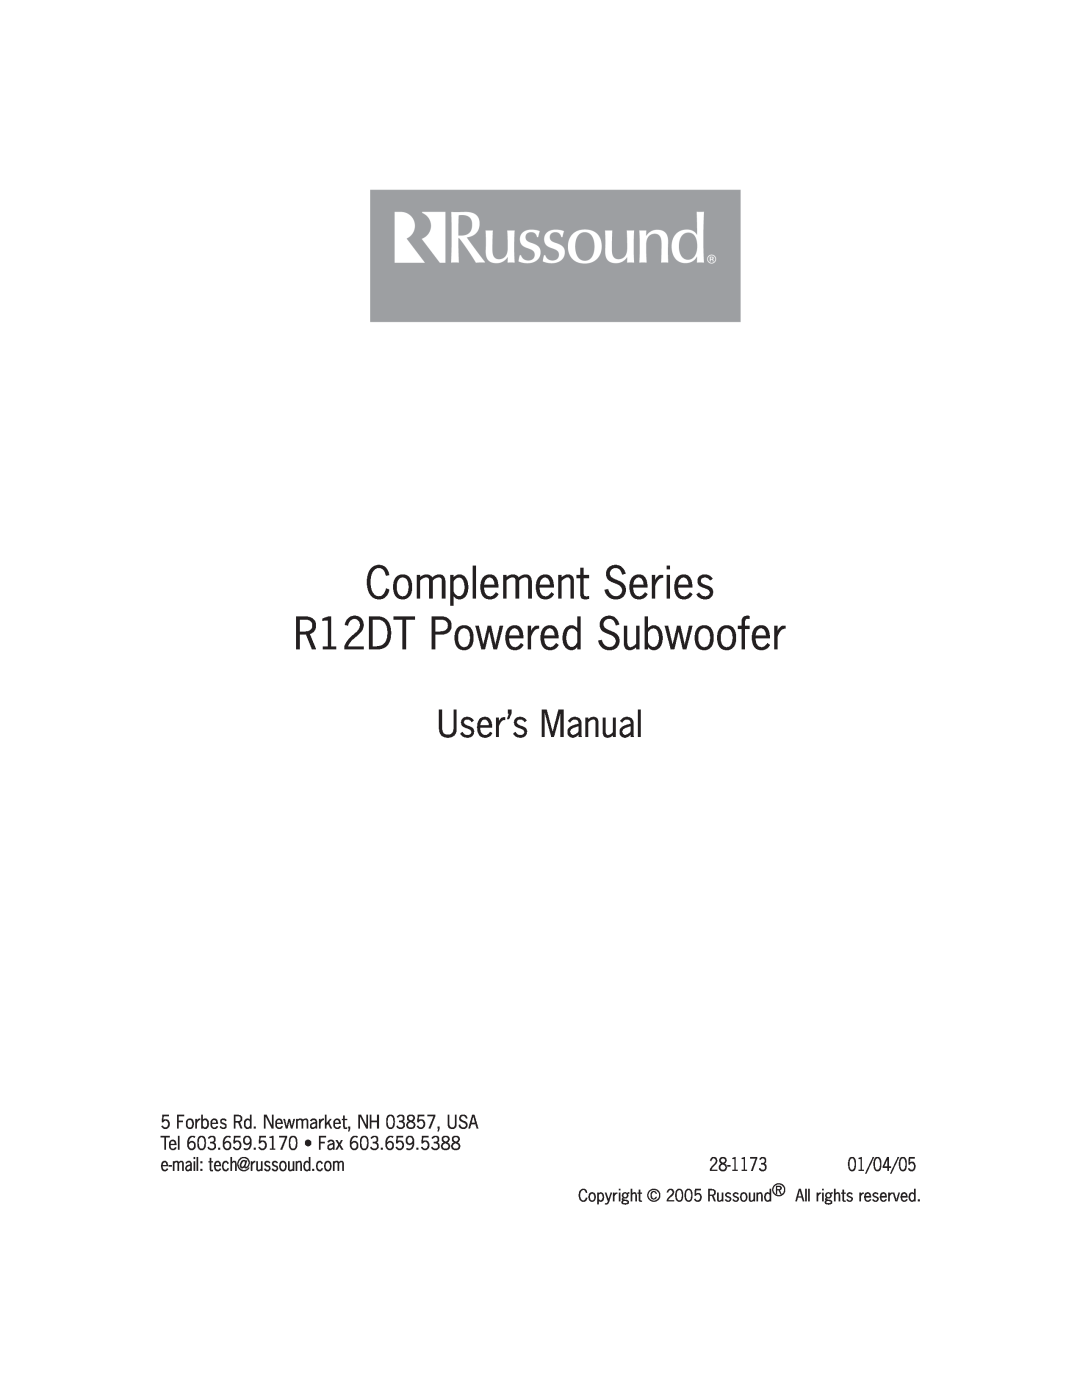 Russound Complement Series R12DT Powered Subwoofer, Forbes Rd. Newmarket, NH 03857, USA, Tel 603.659.5170 Fax, 28-1173 